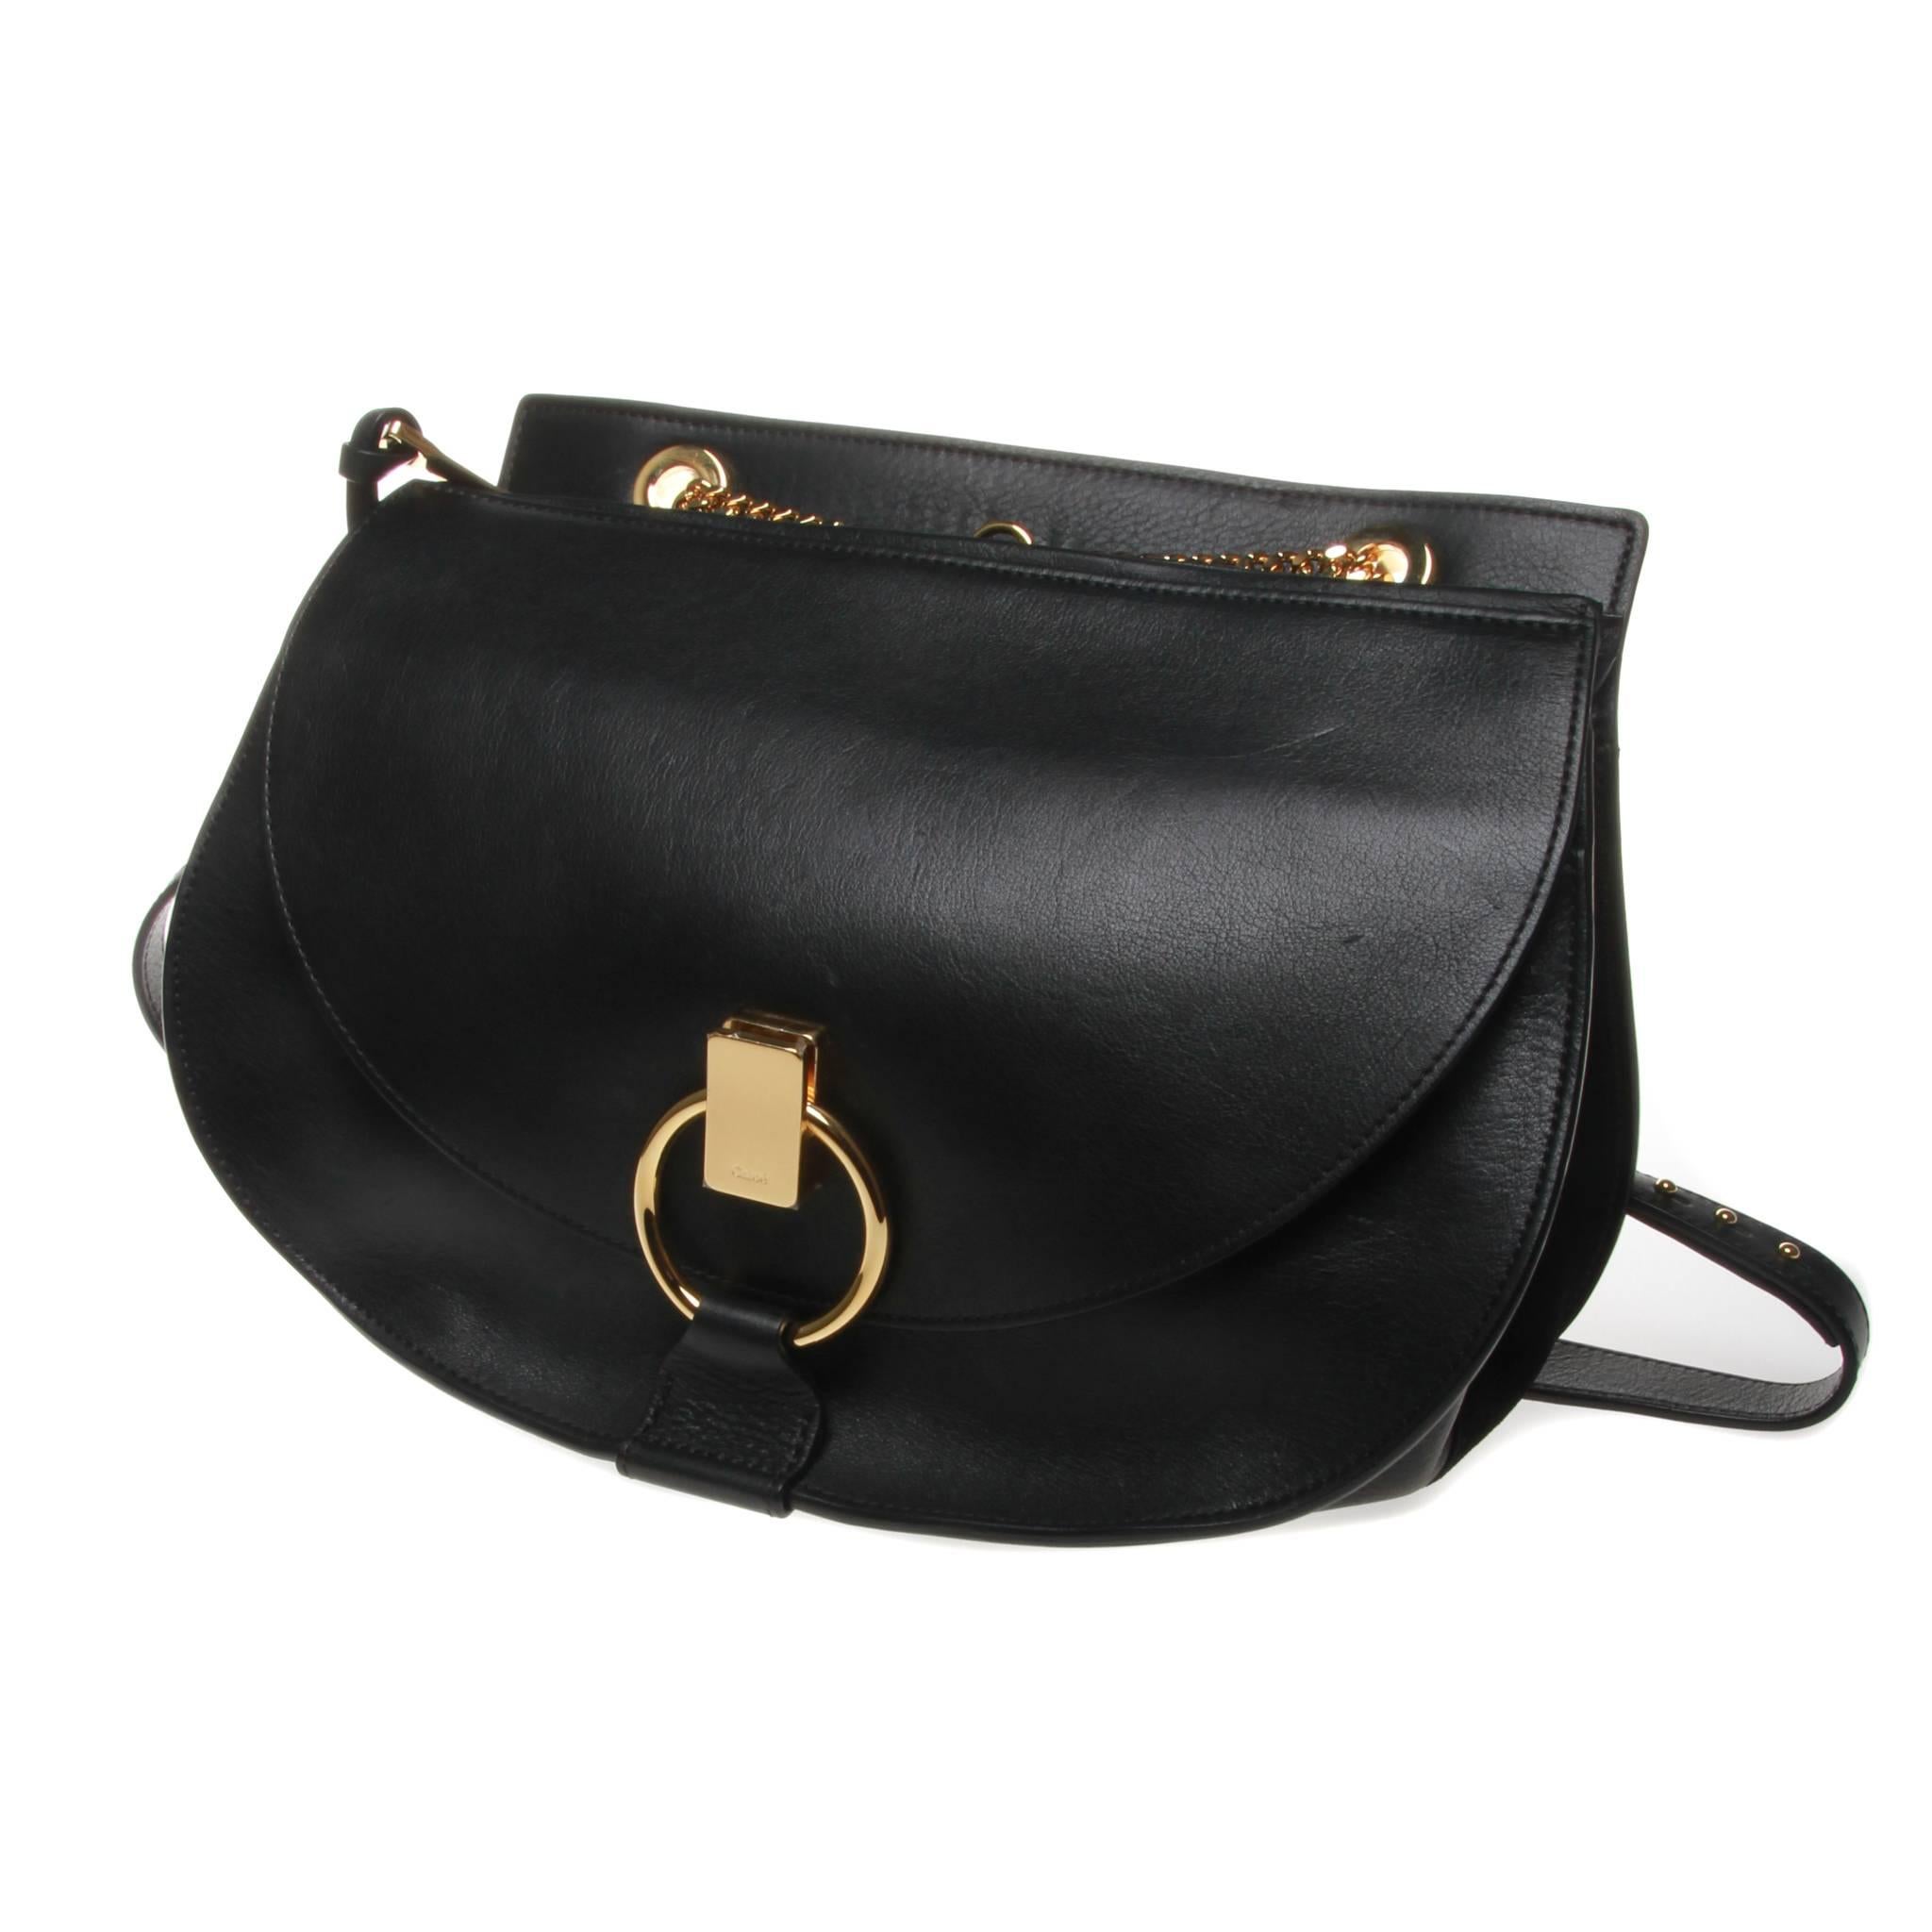 Chloe 'Goldie' shoulder bag in black calf leather and suede with gold-tone hardware. In a covetable shape inspired by the saddle, this bag features a main compartment with zipped top closure, a front flap pocket with ring and clasp fastening and an